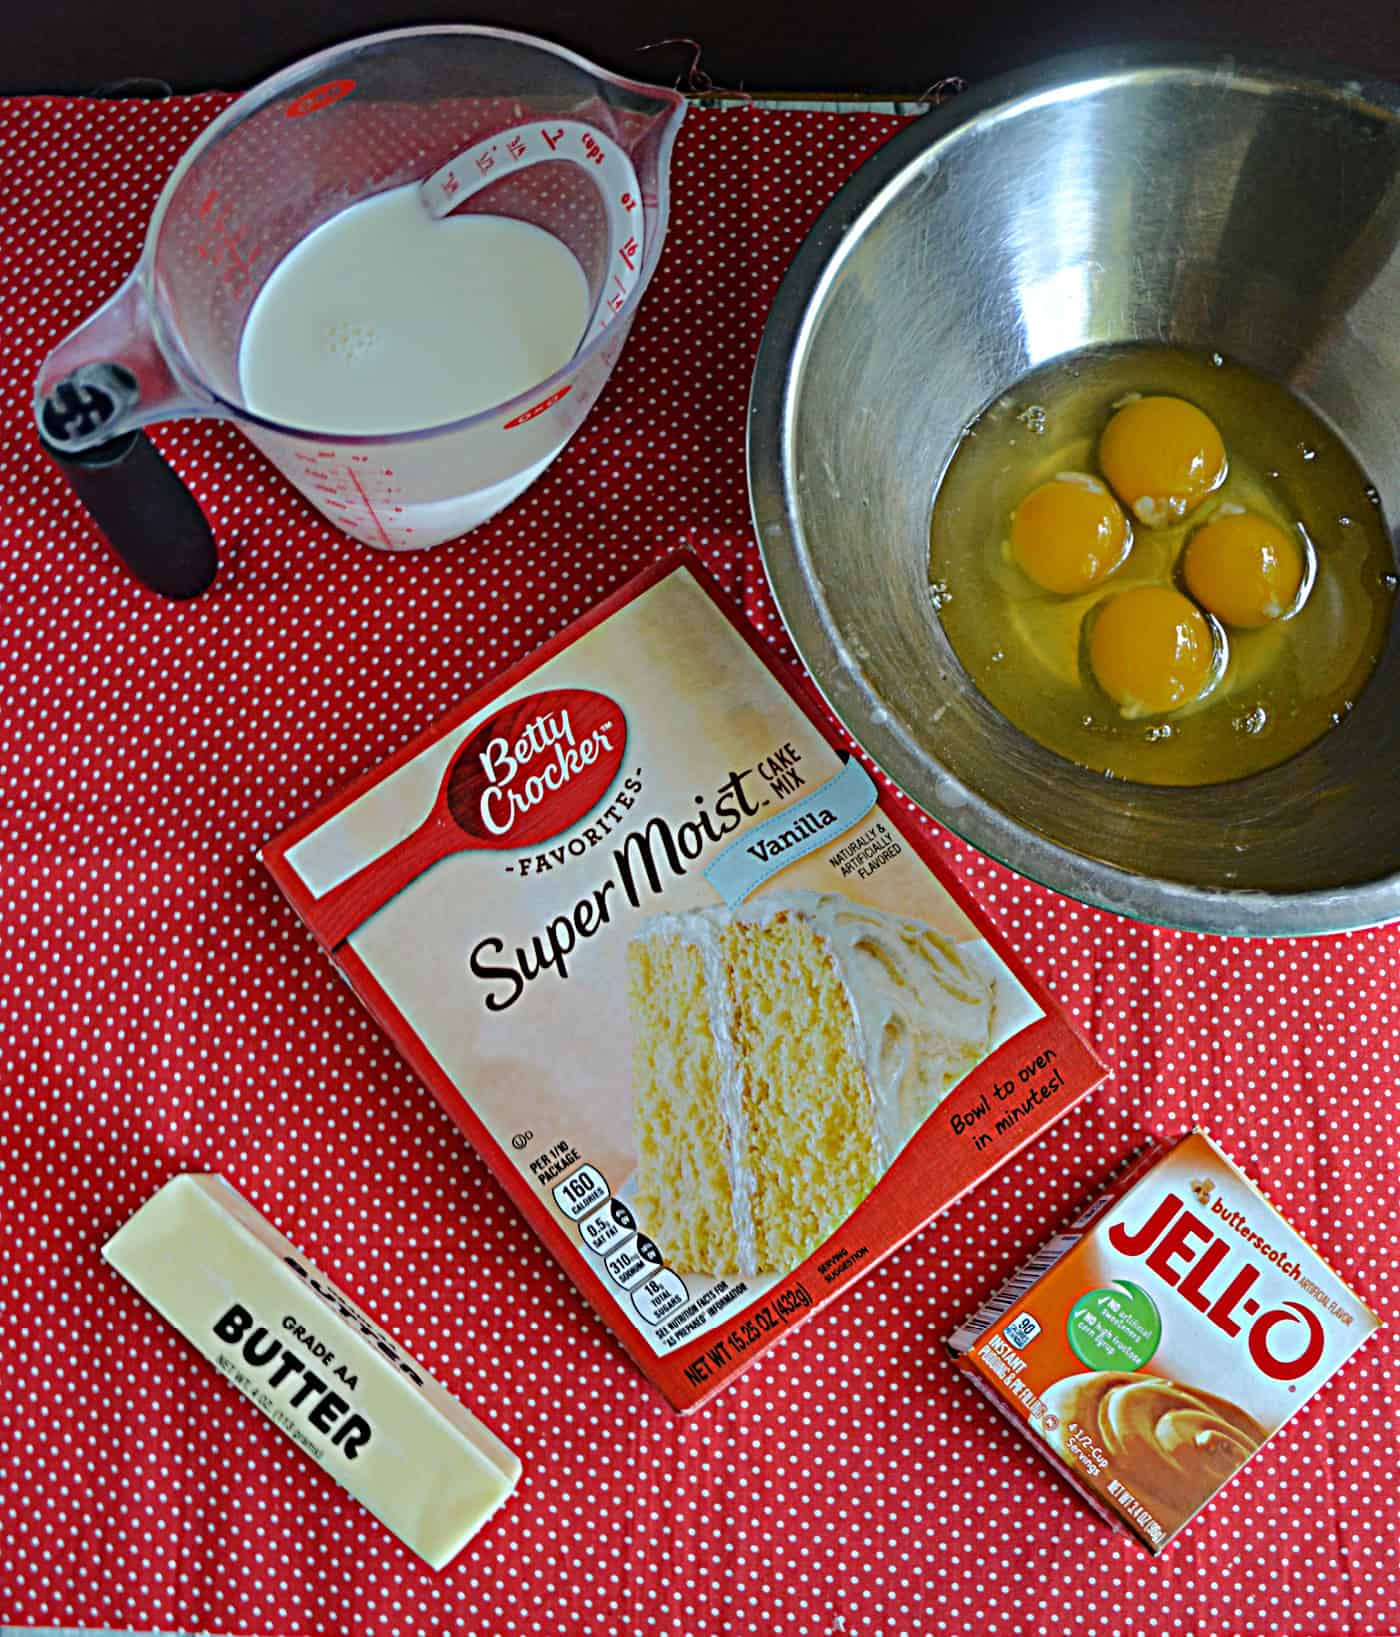 Eggs, cake mix box, a box of pudding mix, a stick of butter, and a cup of milk.